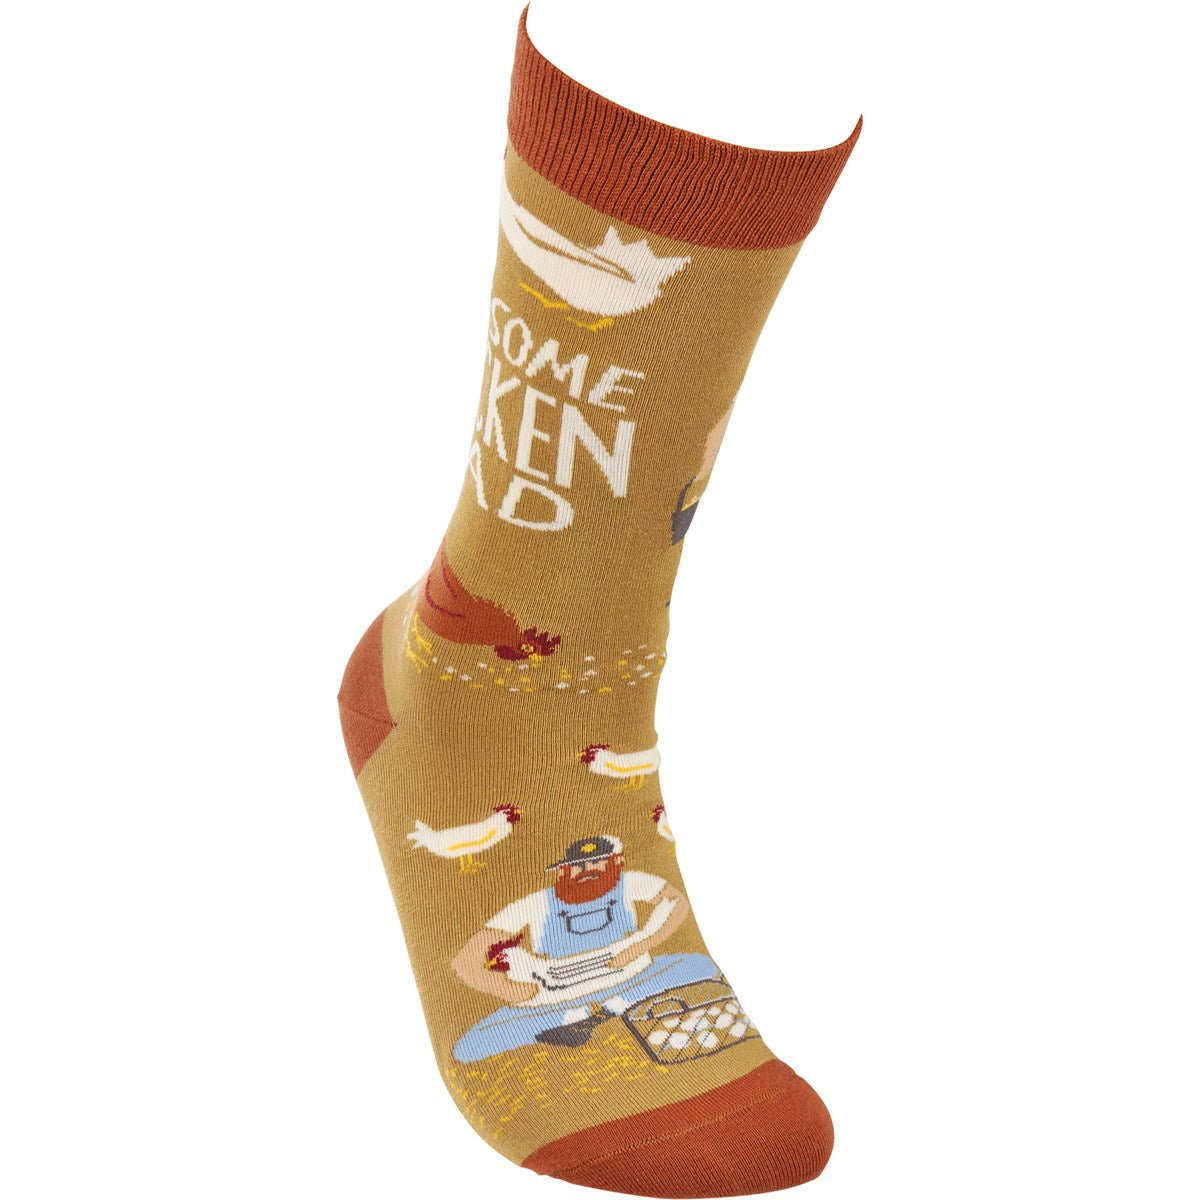 Awesome Chicken Dad Fun Novelty Socks